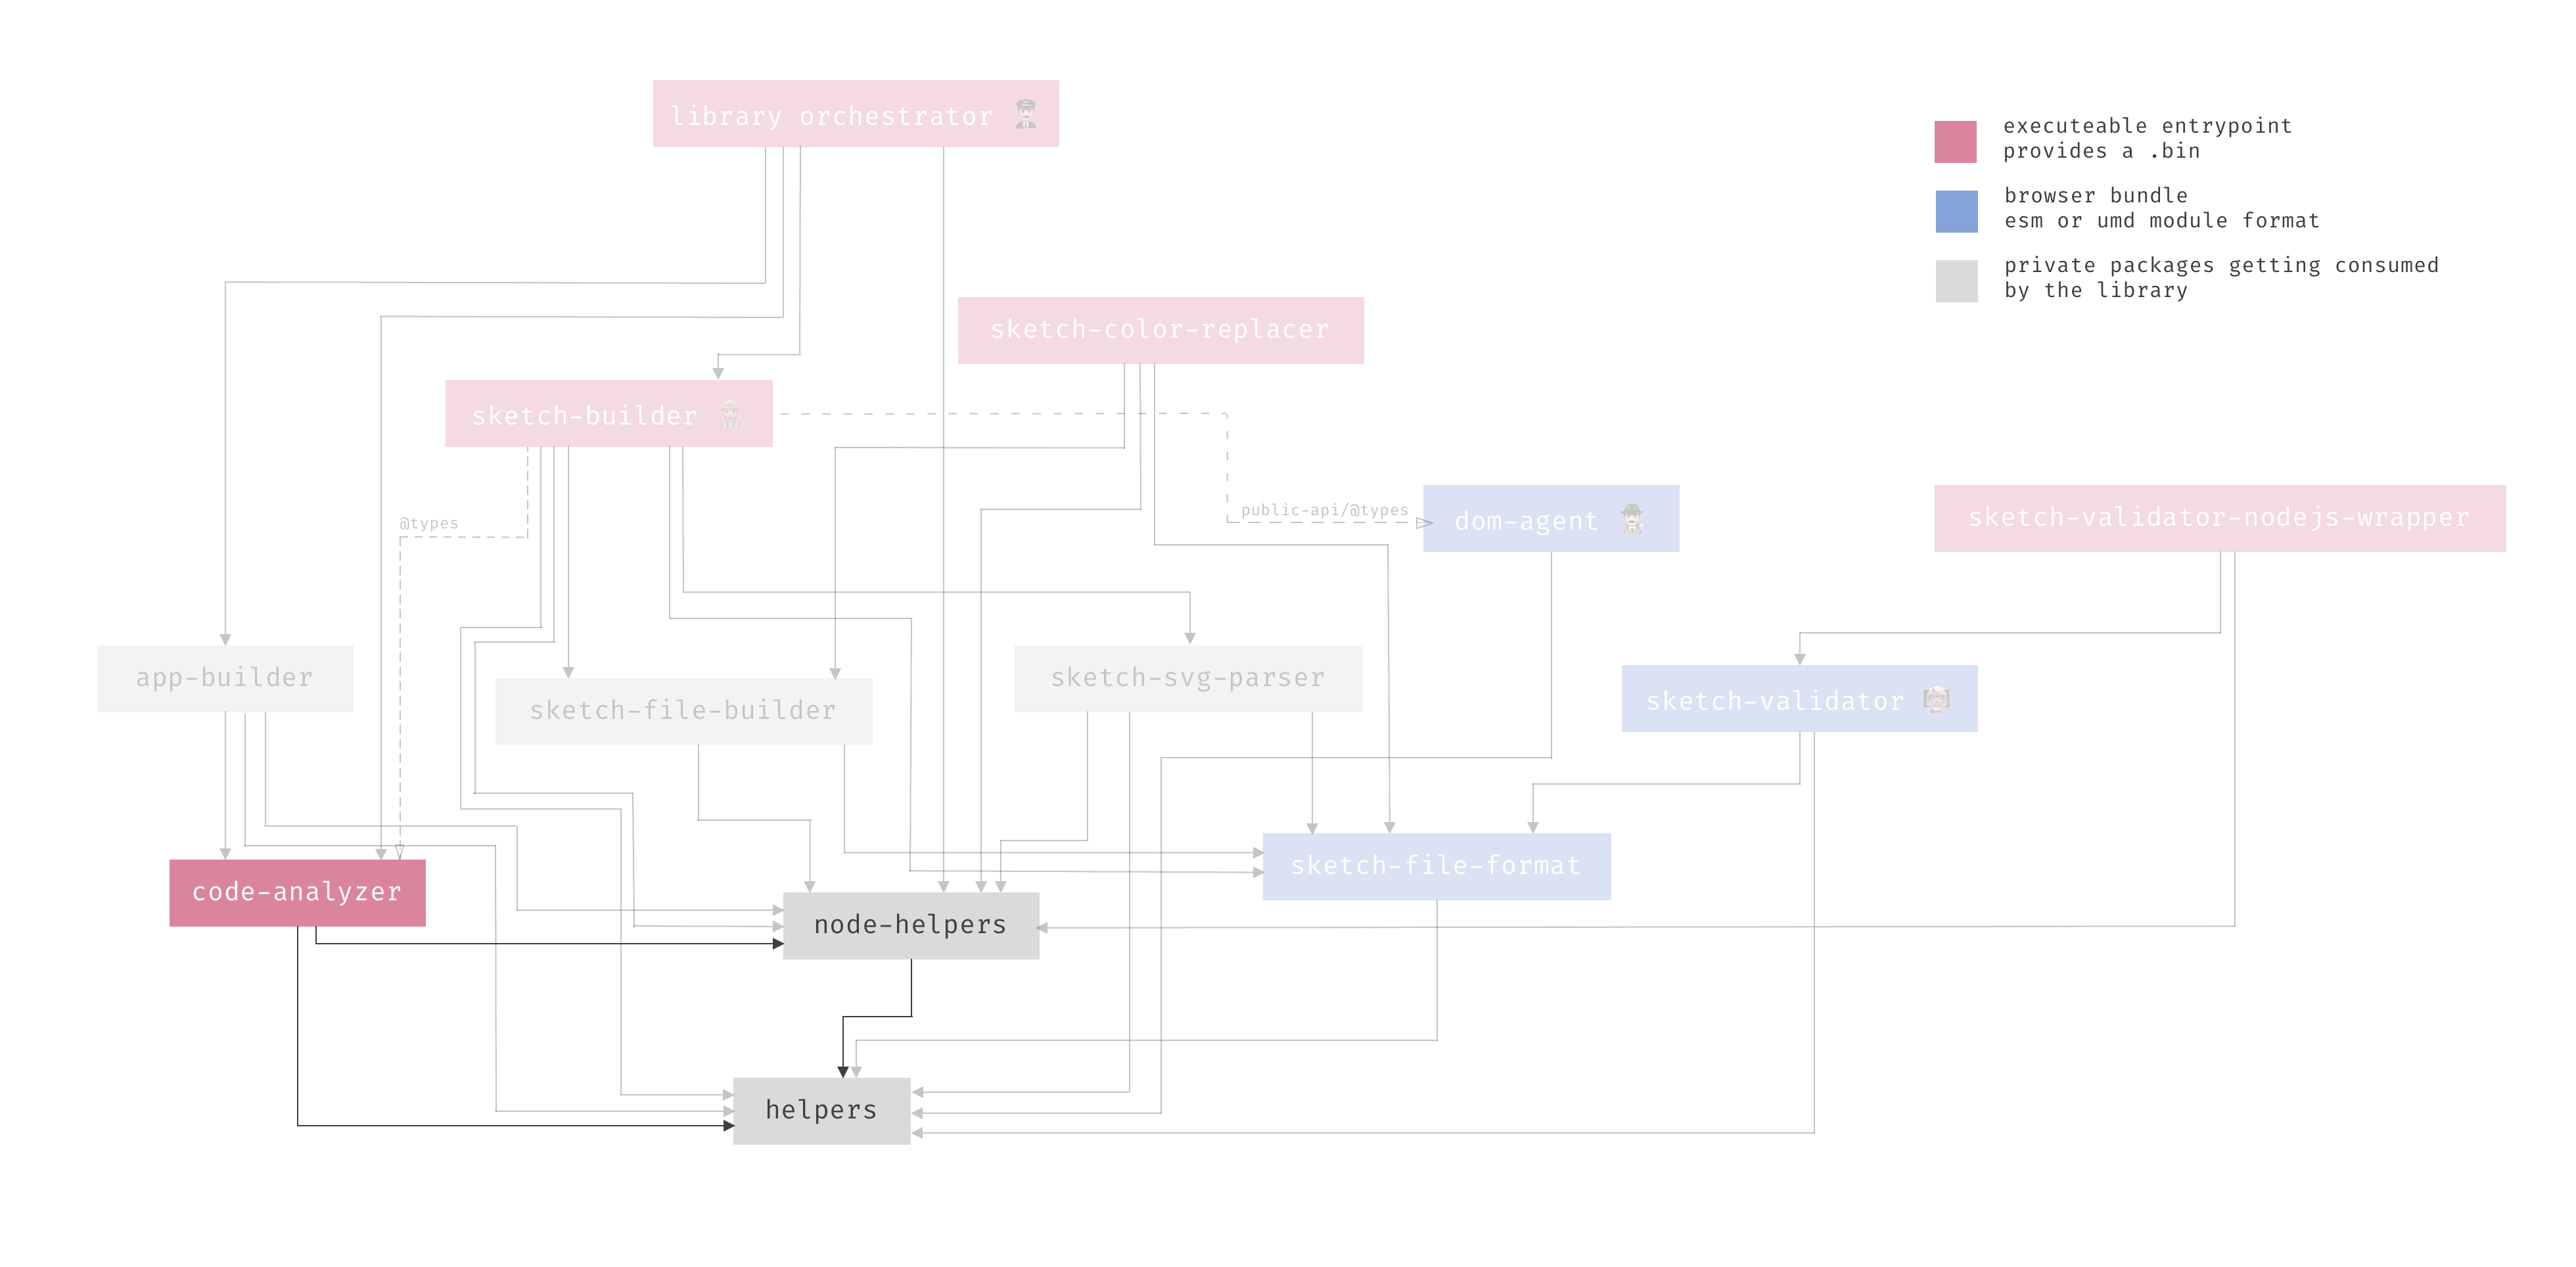 Dependency graph of the sketchmine code-analyzer